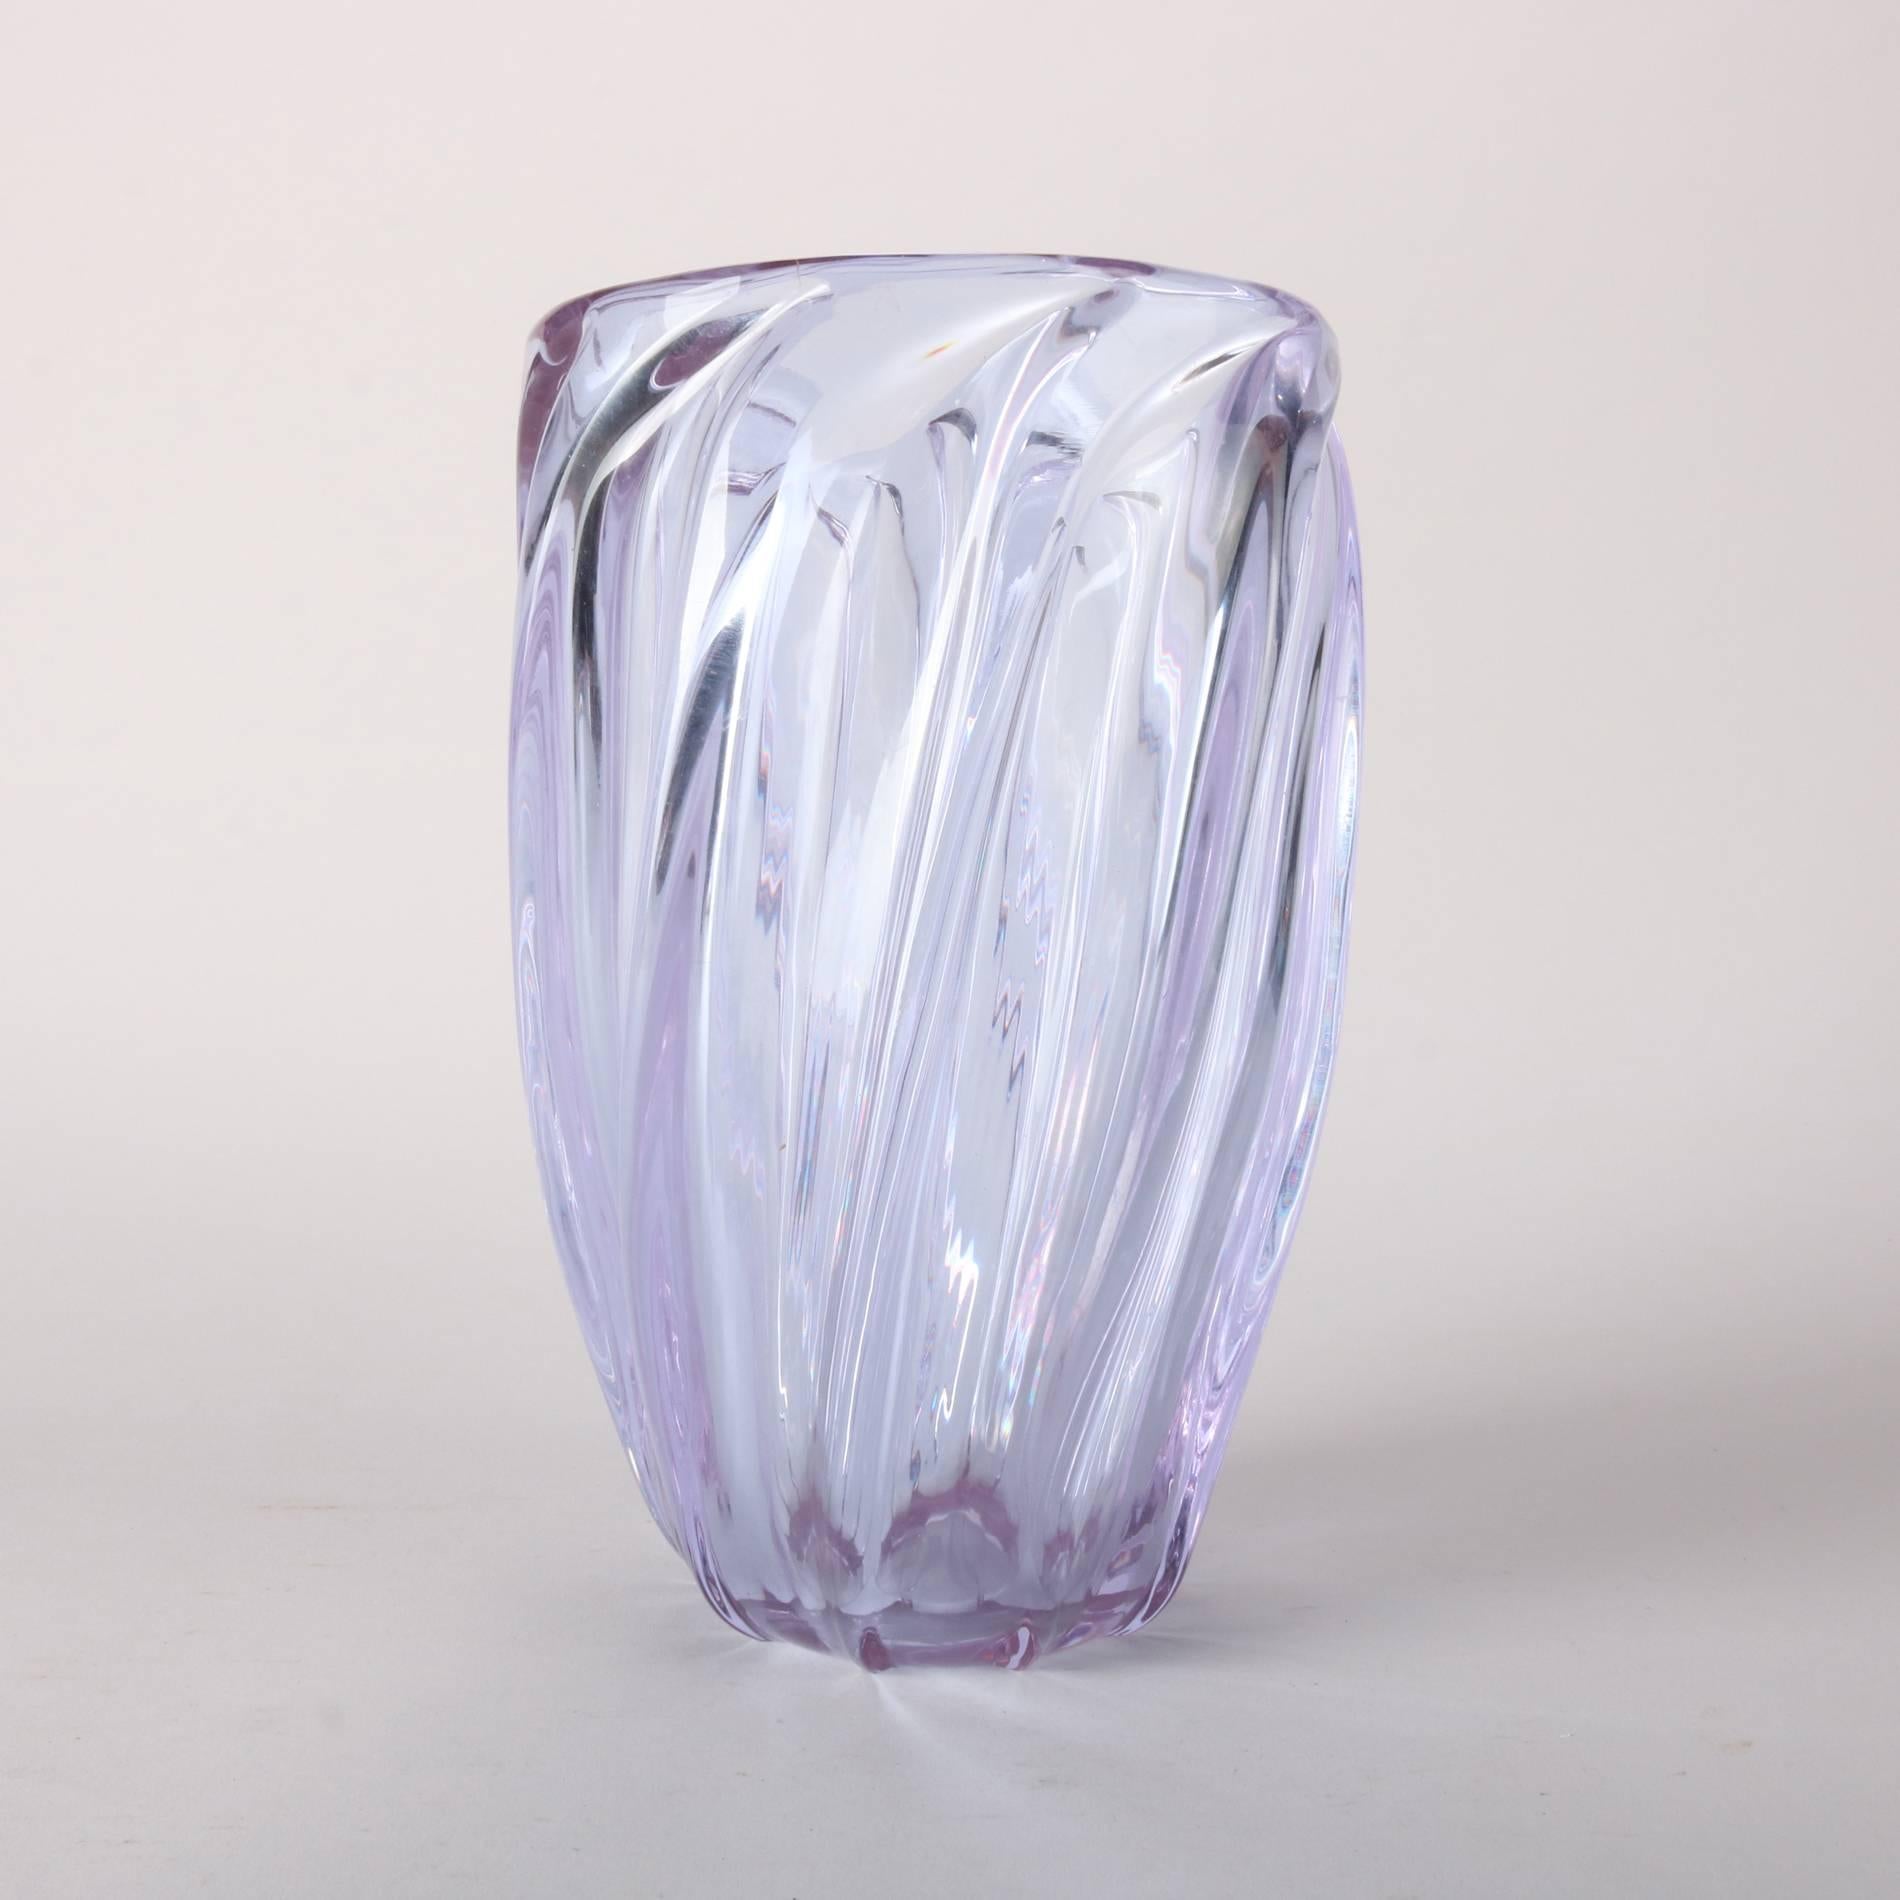 Antique French Baccarat School lead crystal vase features twist form in sky blue glass, 20th century

The glass is sky blue in color, however, in photographing, appears violet.

Measures: 10" x 6.5" diameter.